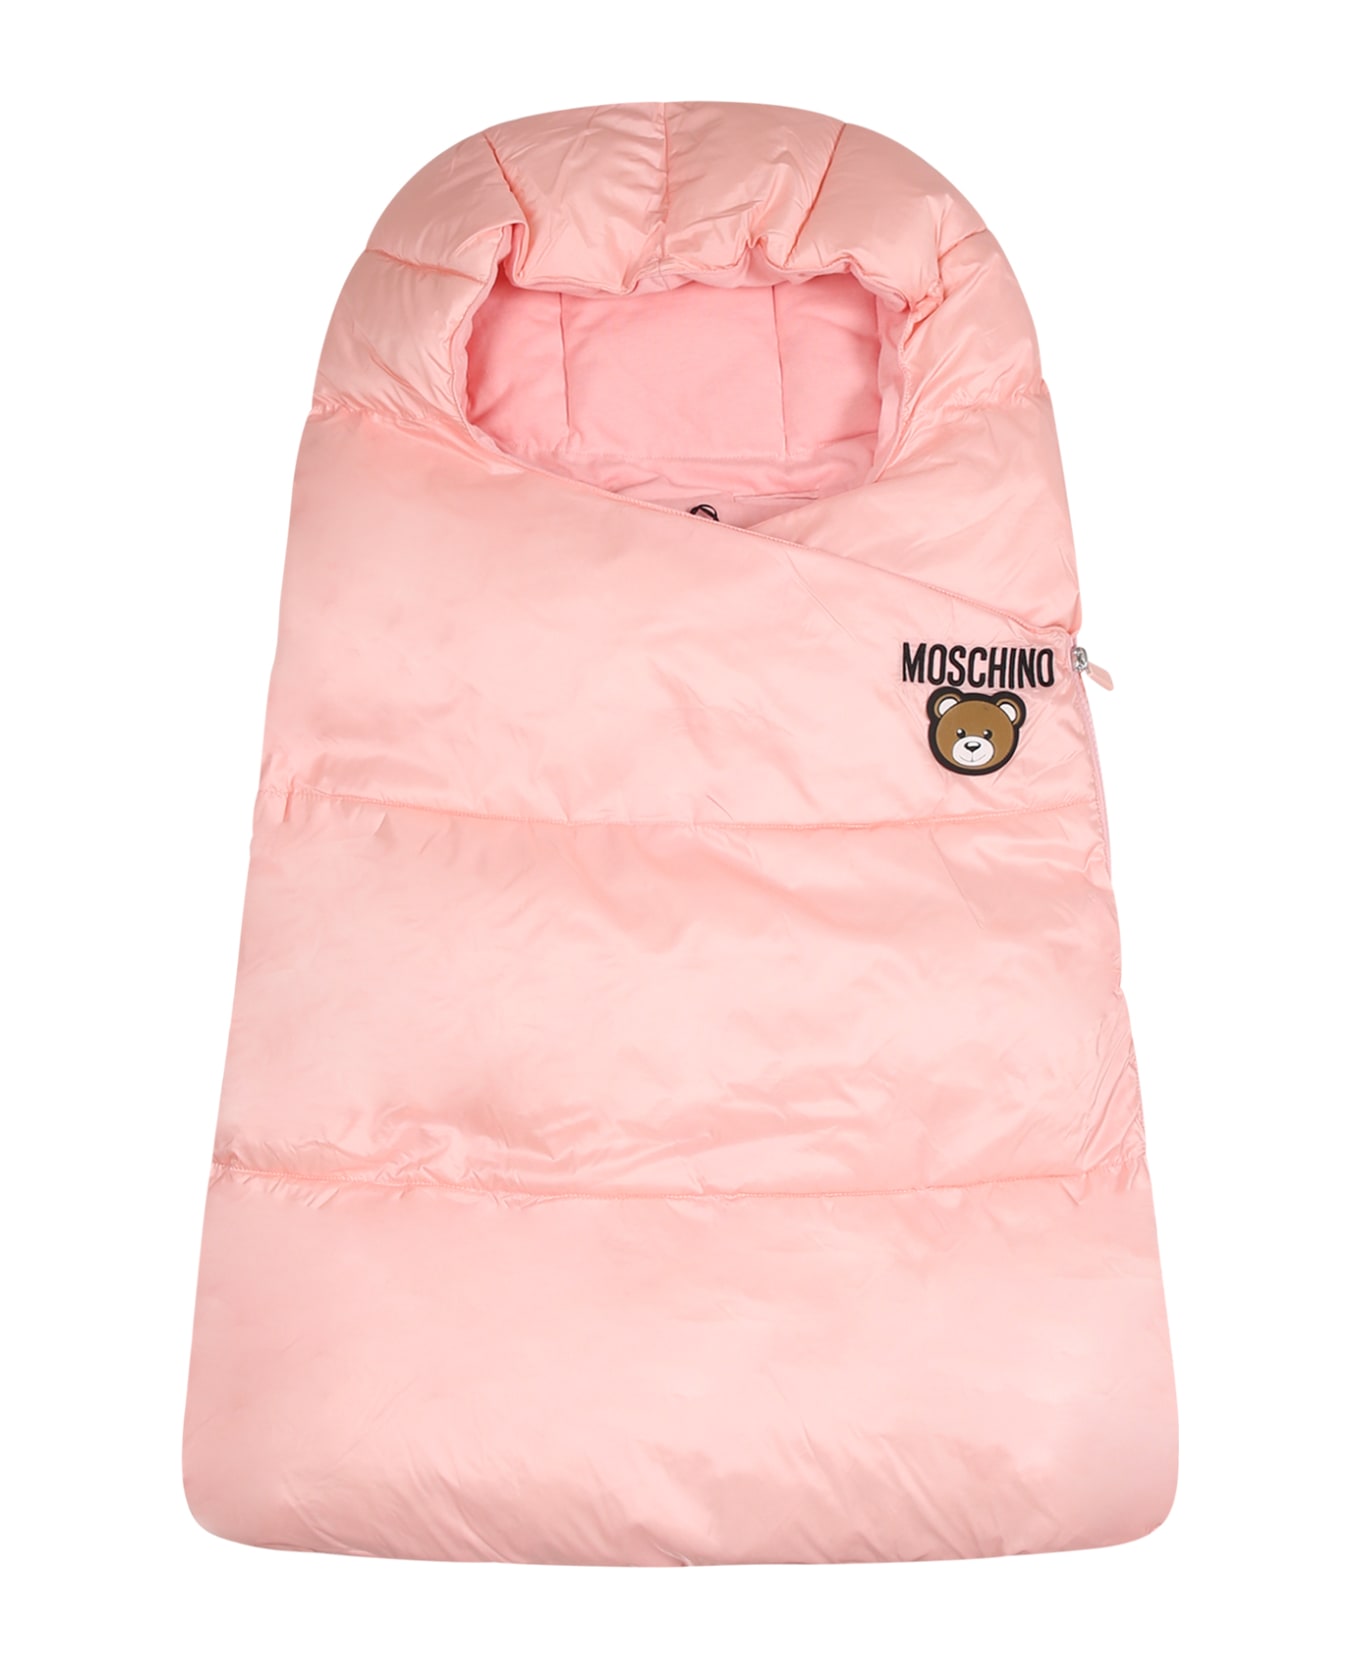 Moschino Pink Sleeping Bag For Baby Girl With Teddy Bear And Logo - Pink アクセサリー＆ギフト